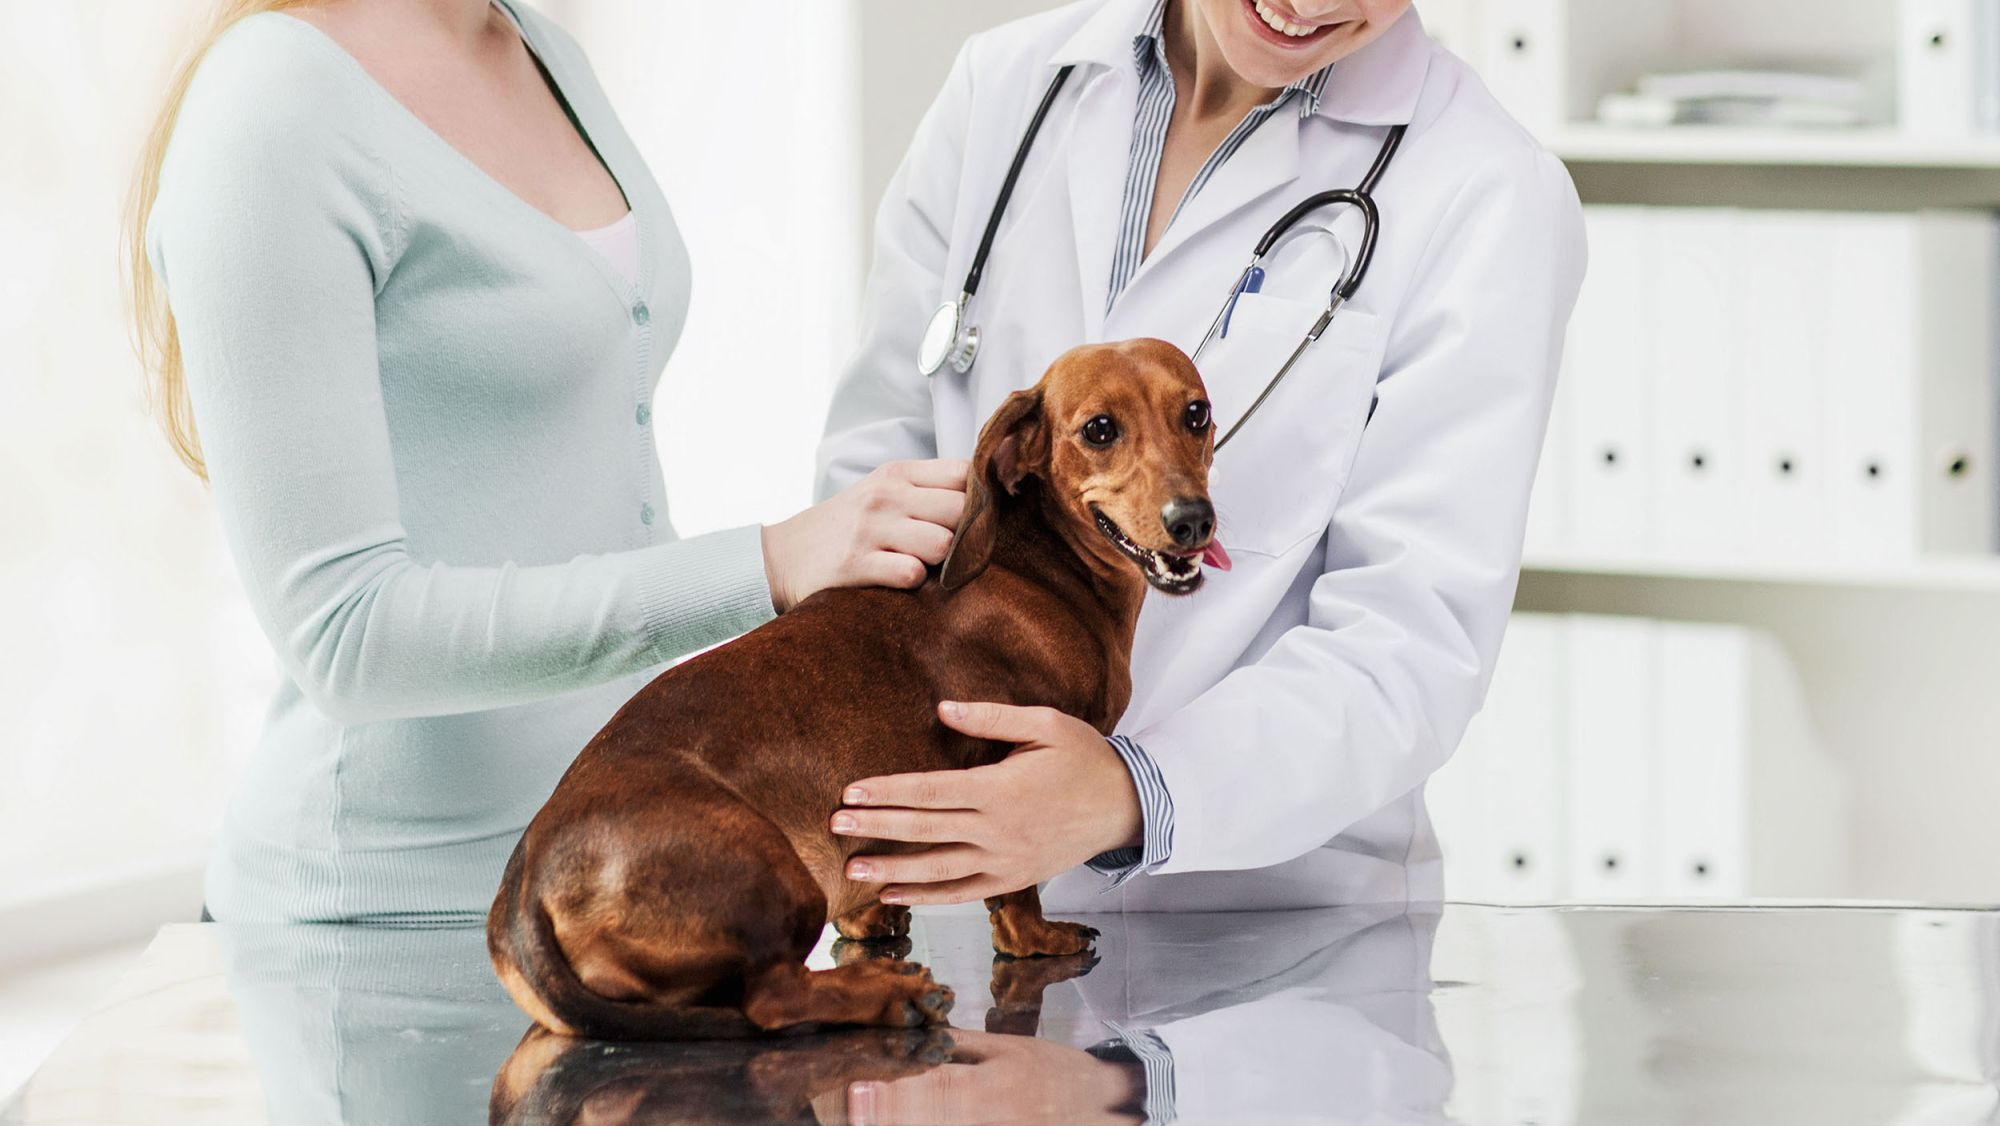 Adult Dachshund sitting on an examination table while owner speaks to a vet